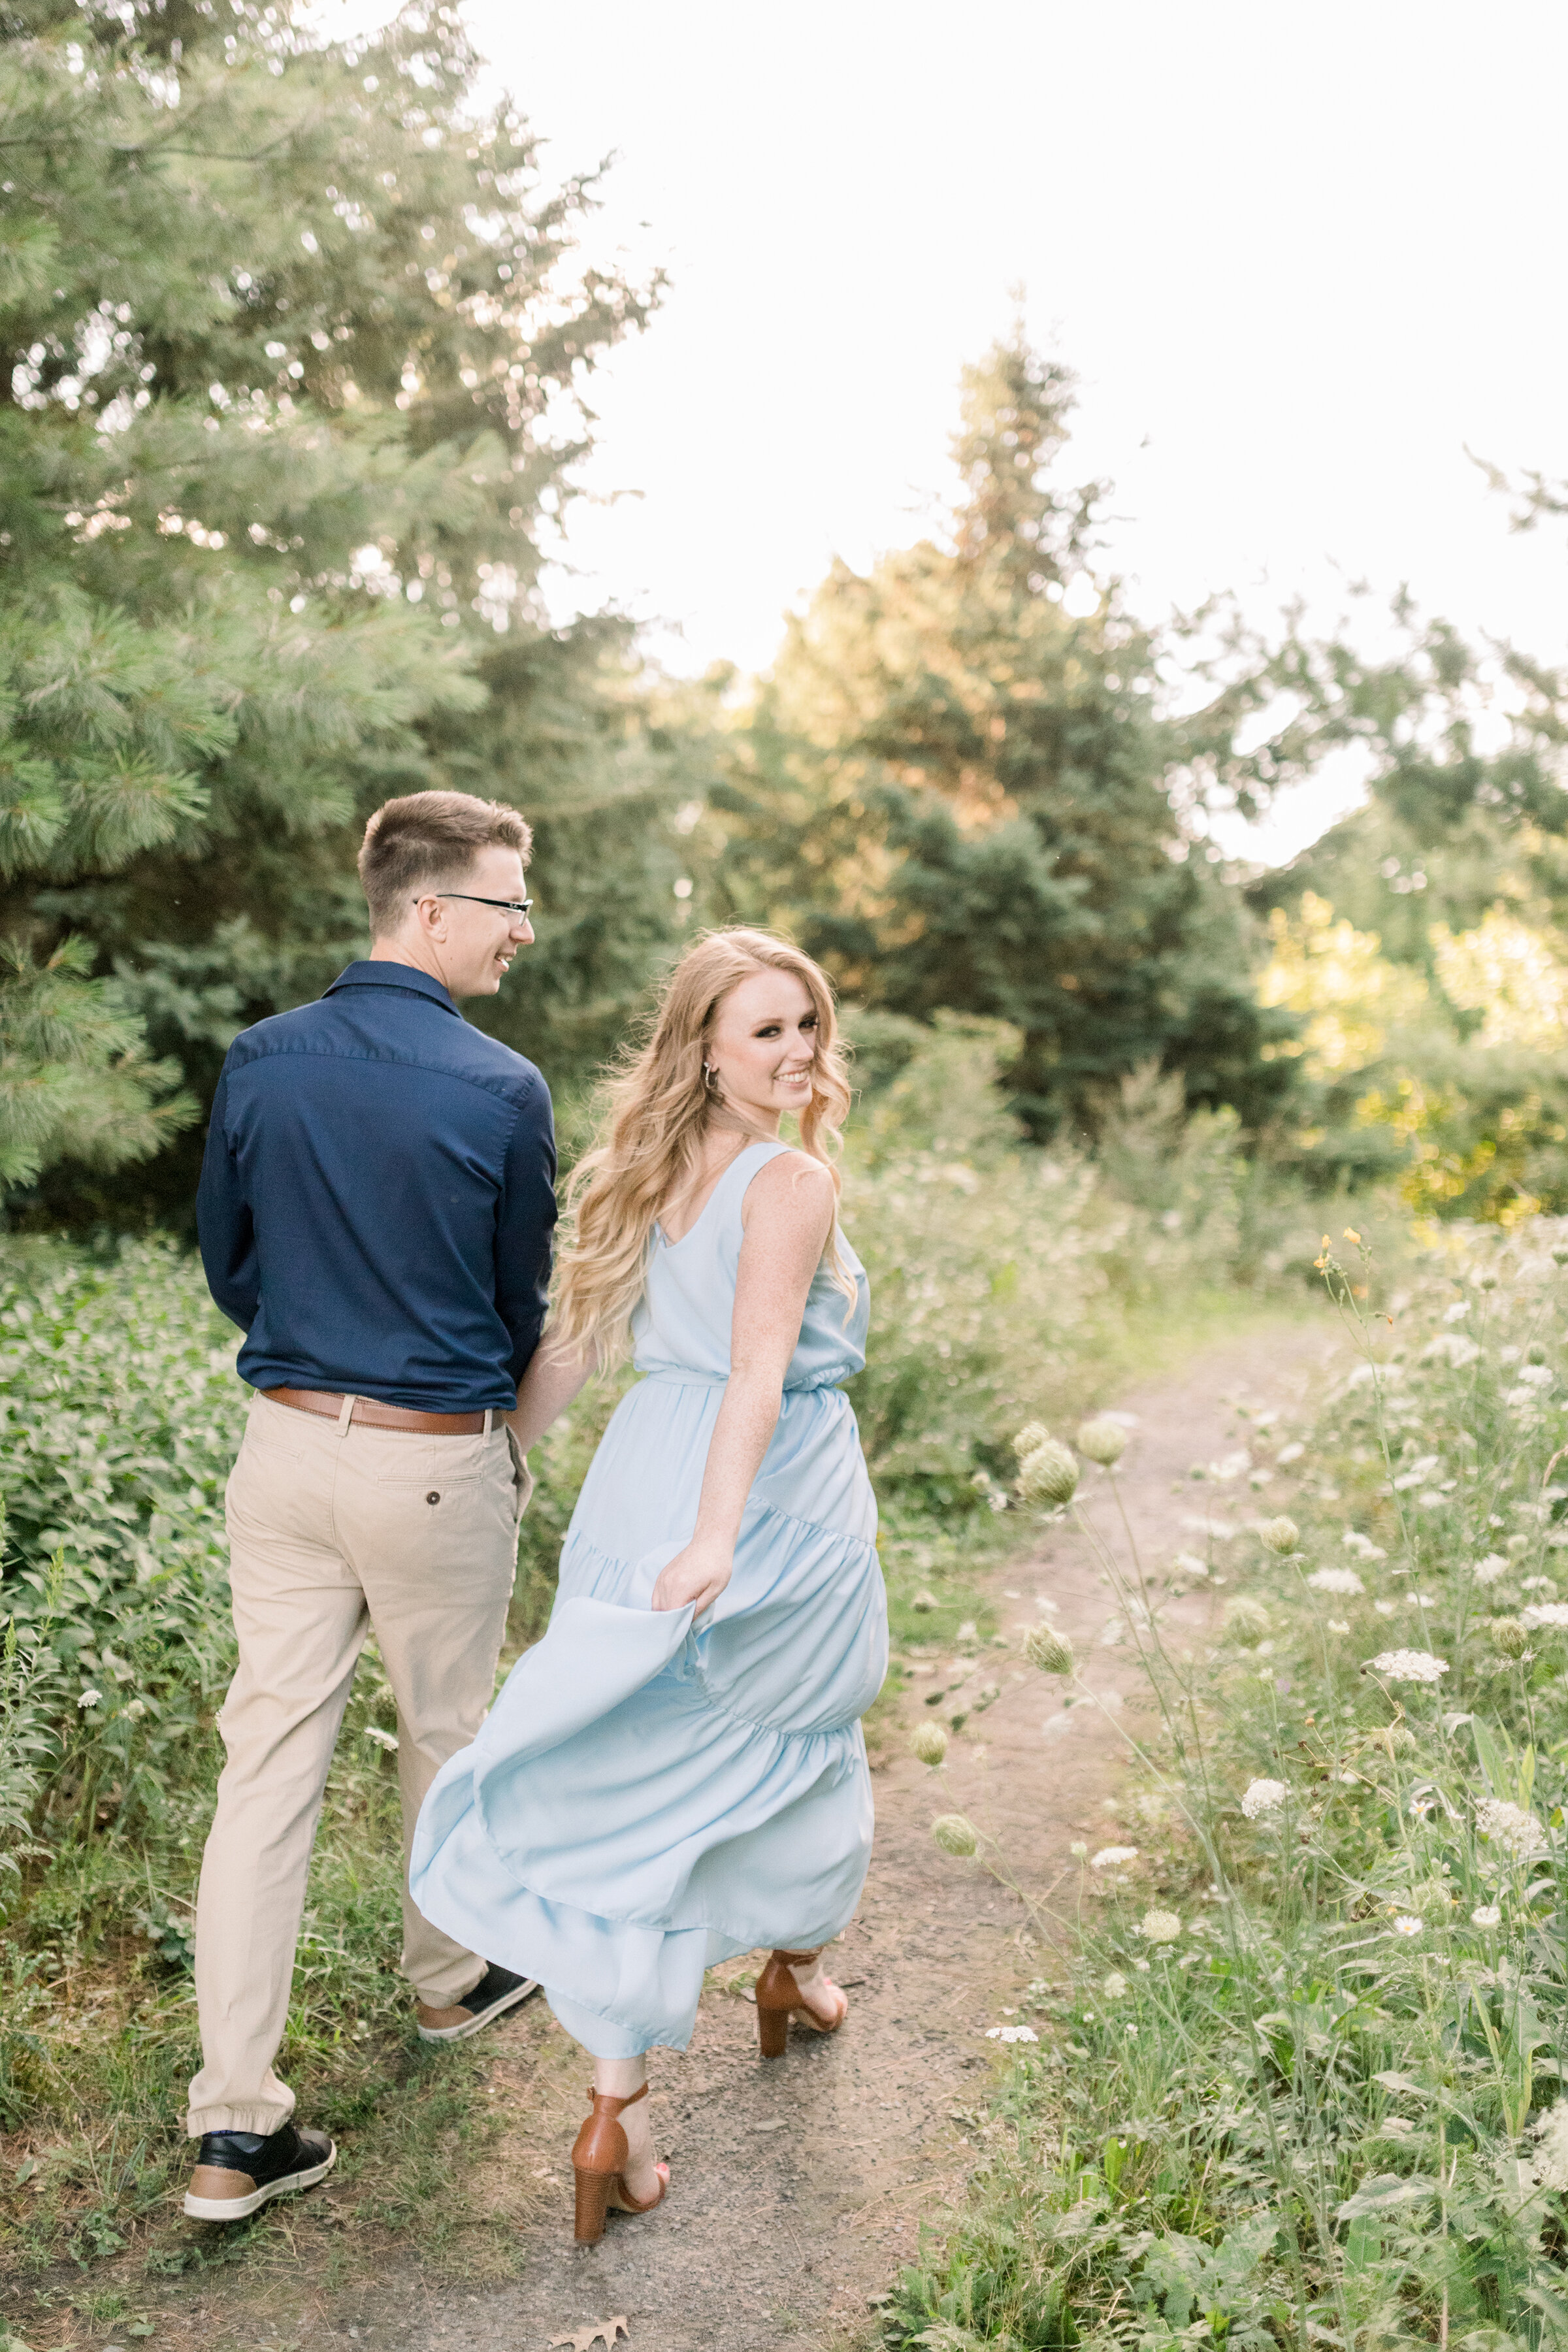  A glowing soon to be bride looks back at the camera as she’s lead by her fiancé in a beautiful Dominion Arboretum engagement photo shoot in Ottawa by Chelsea Mason Photography. Couple walking pose inspiration couple goals engagement photo shoot insp